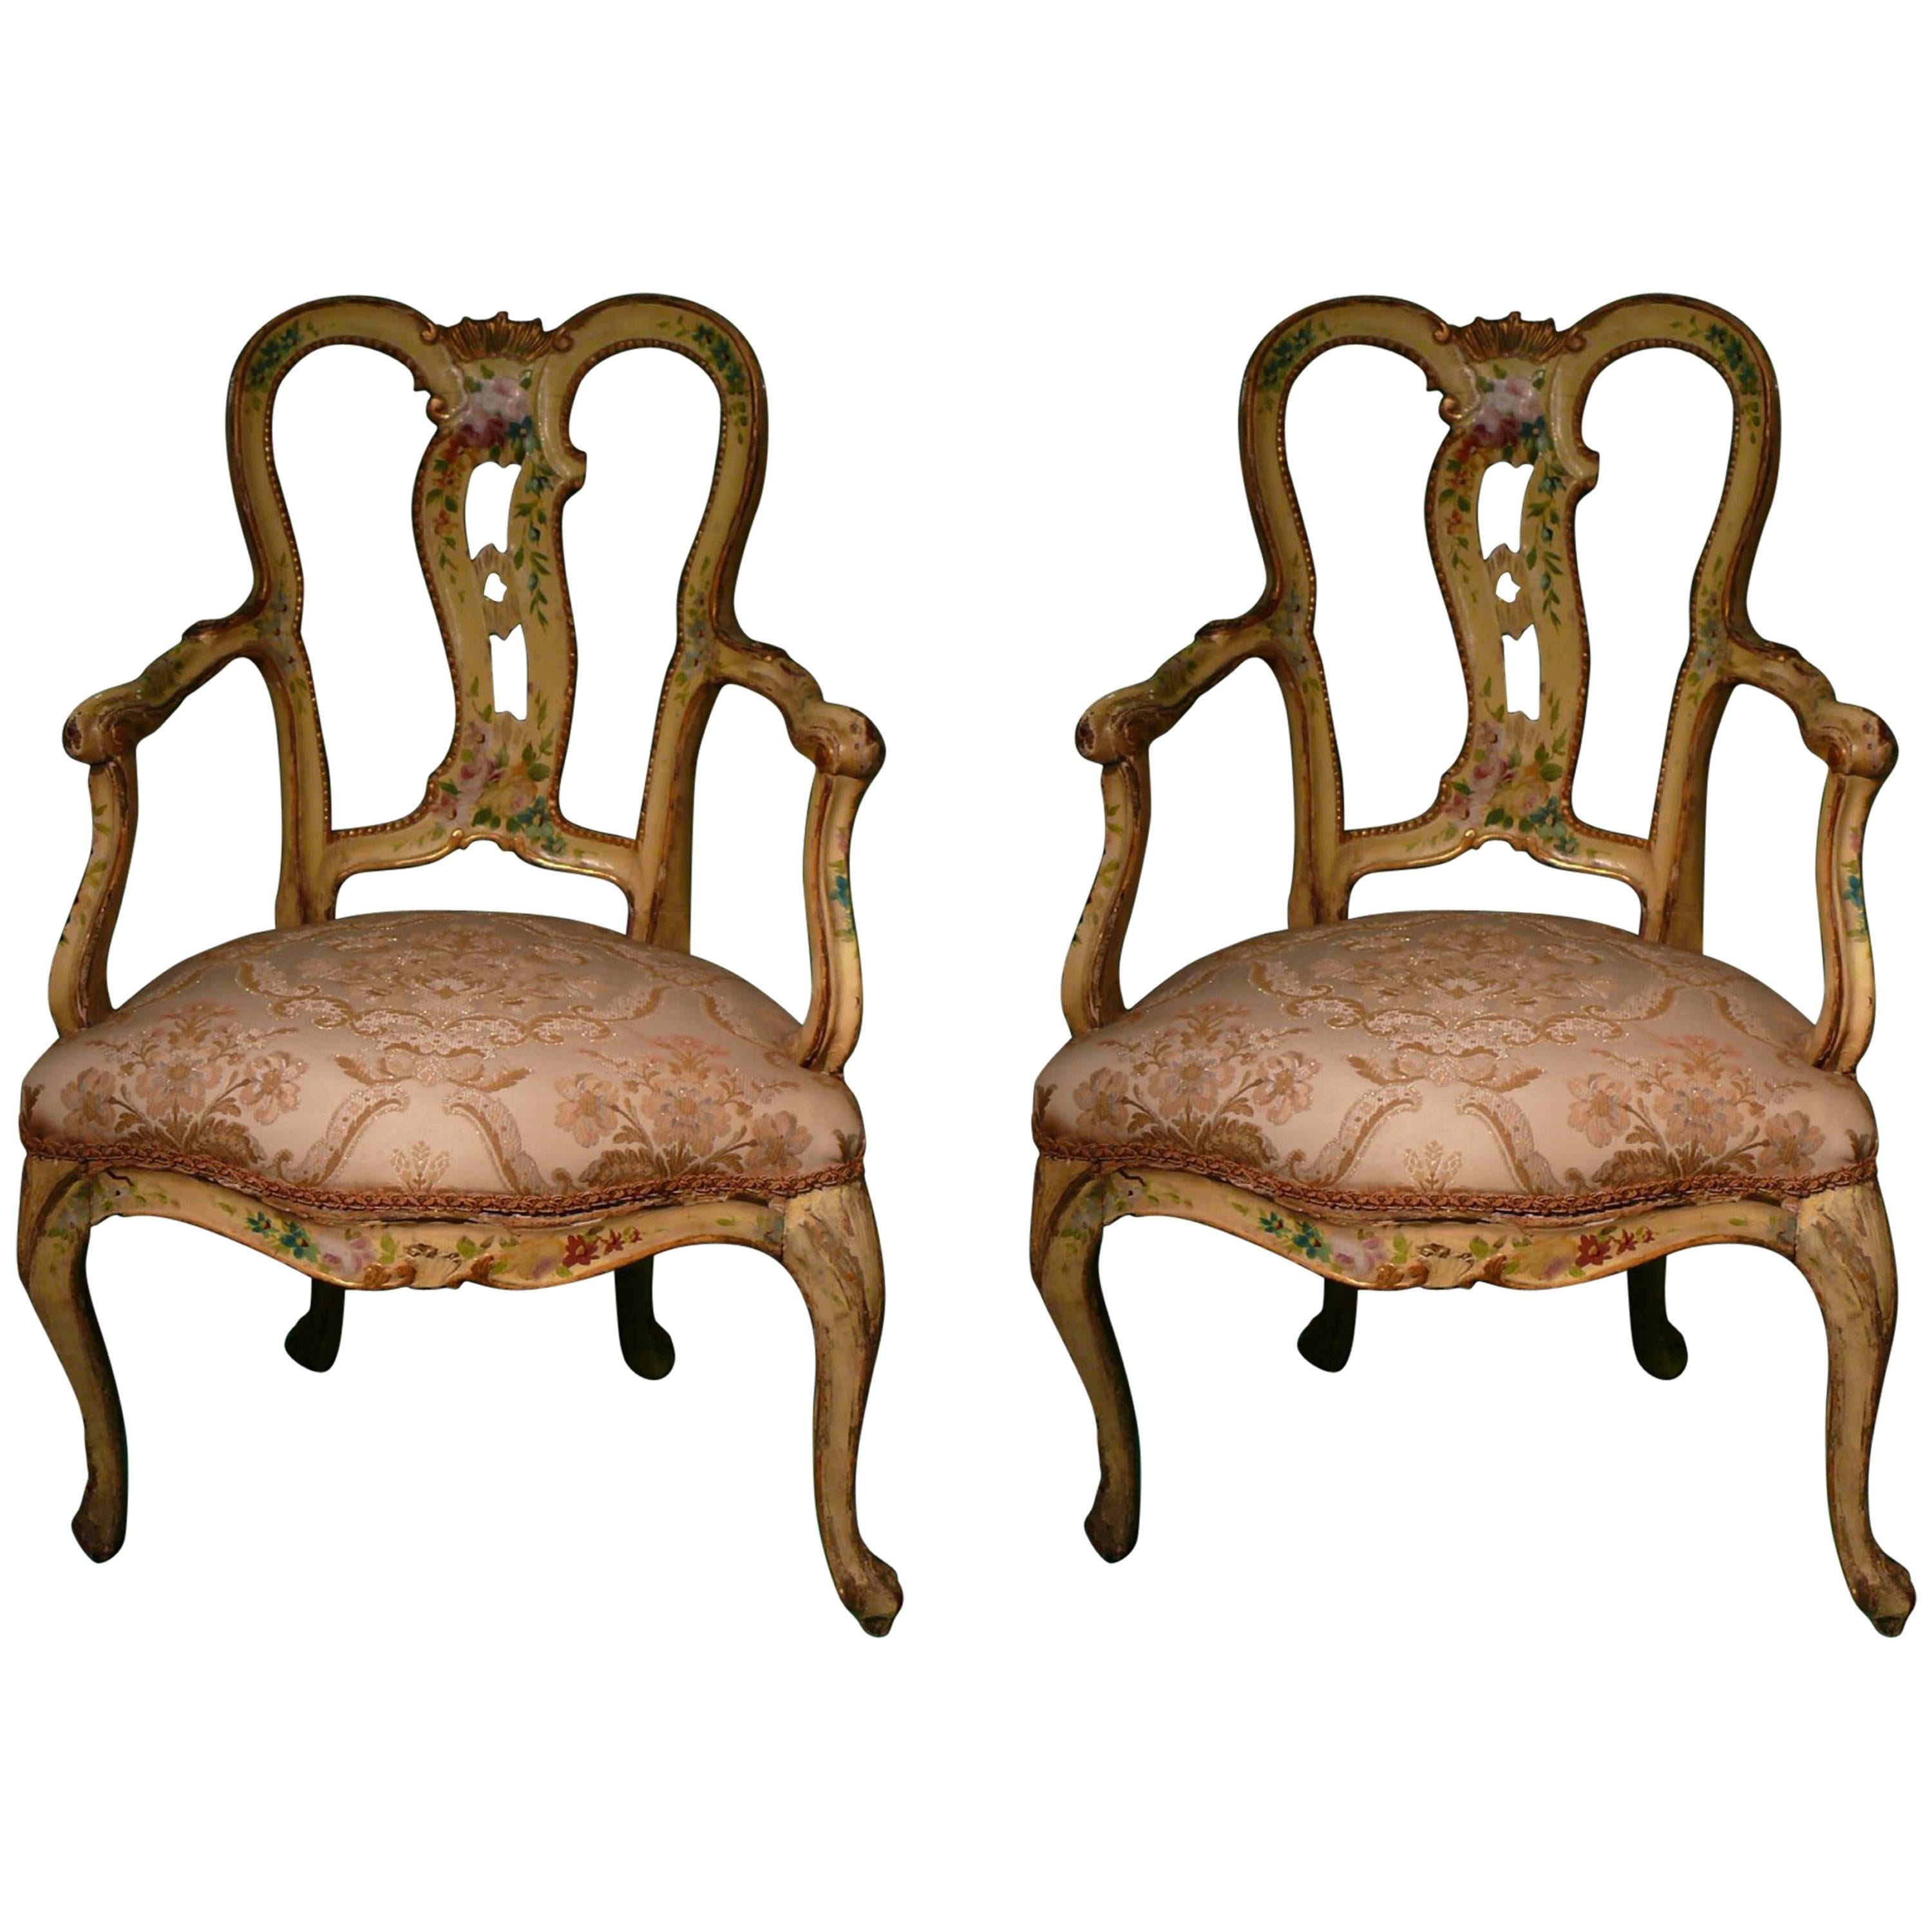 Authentic Pair of Louis XV Lacquered Armchairs, Venice